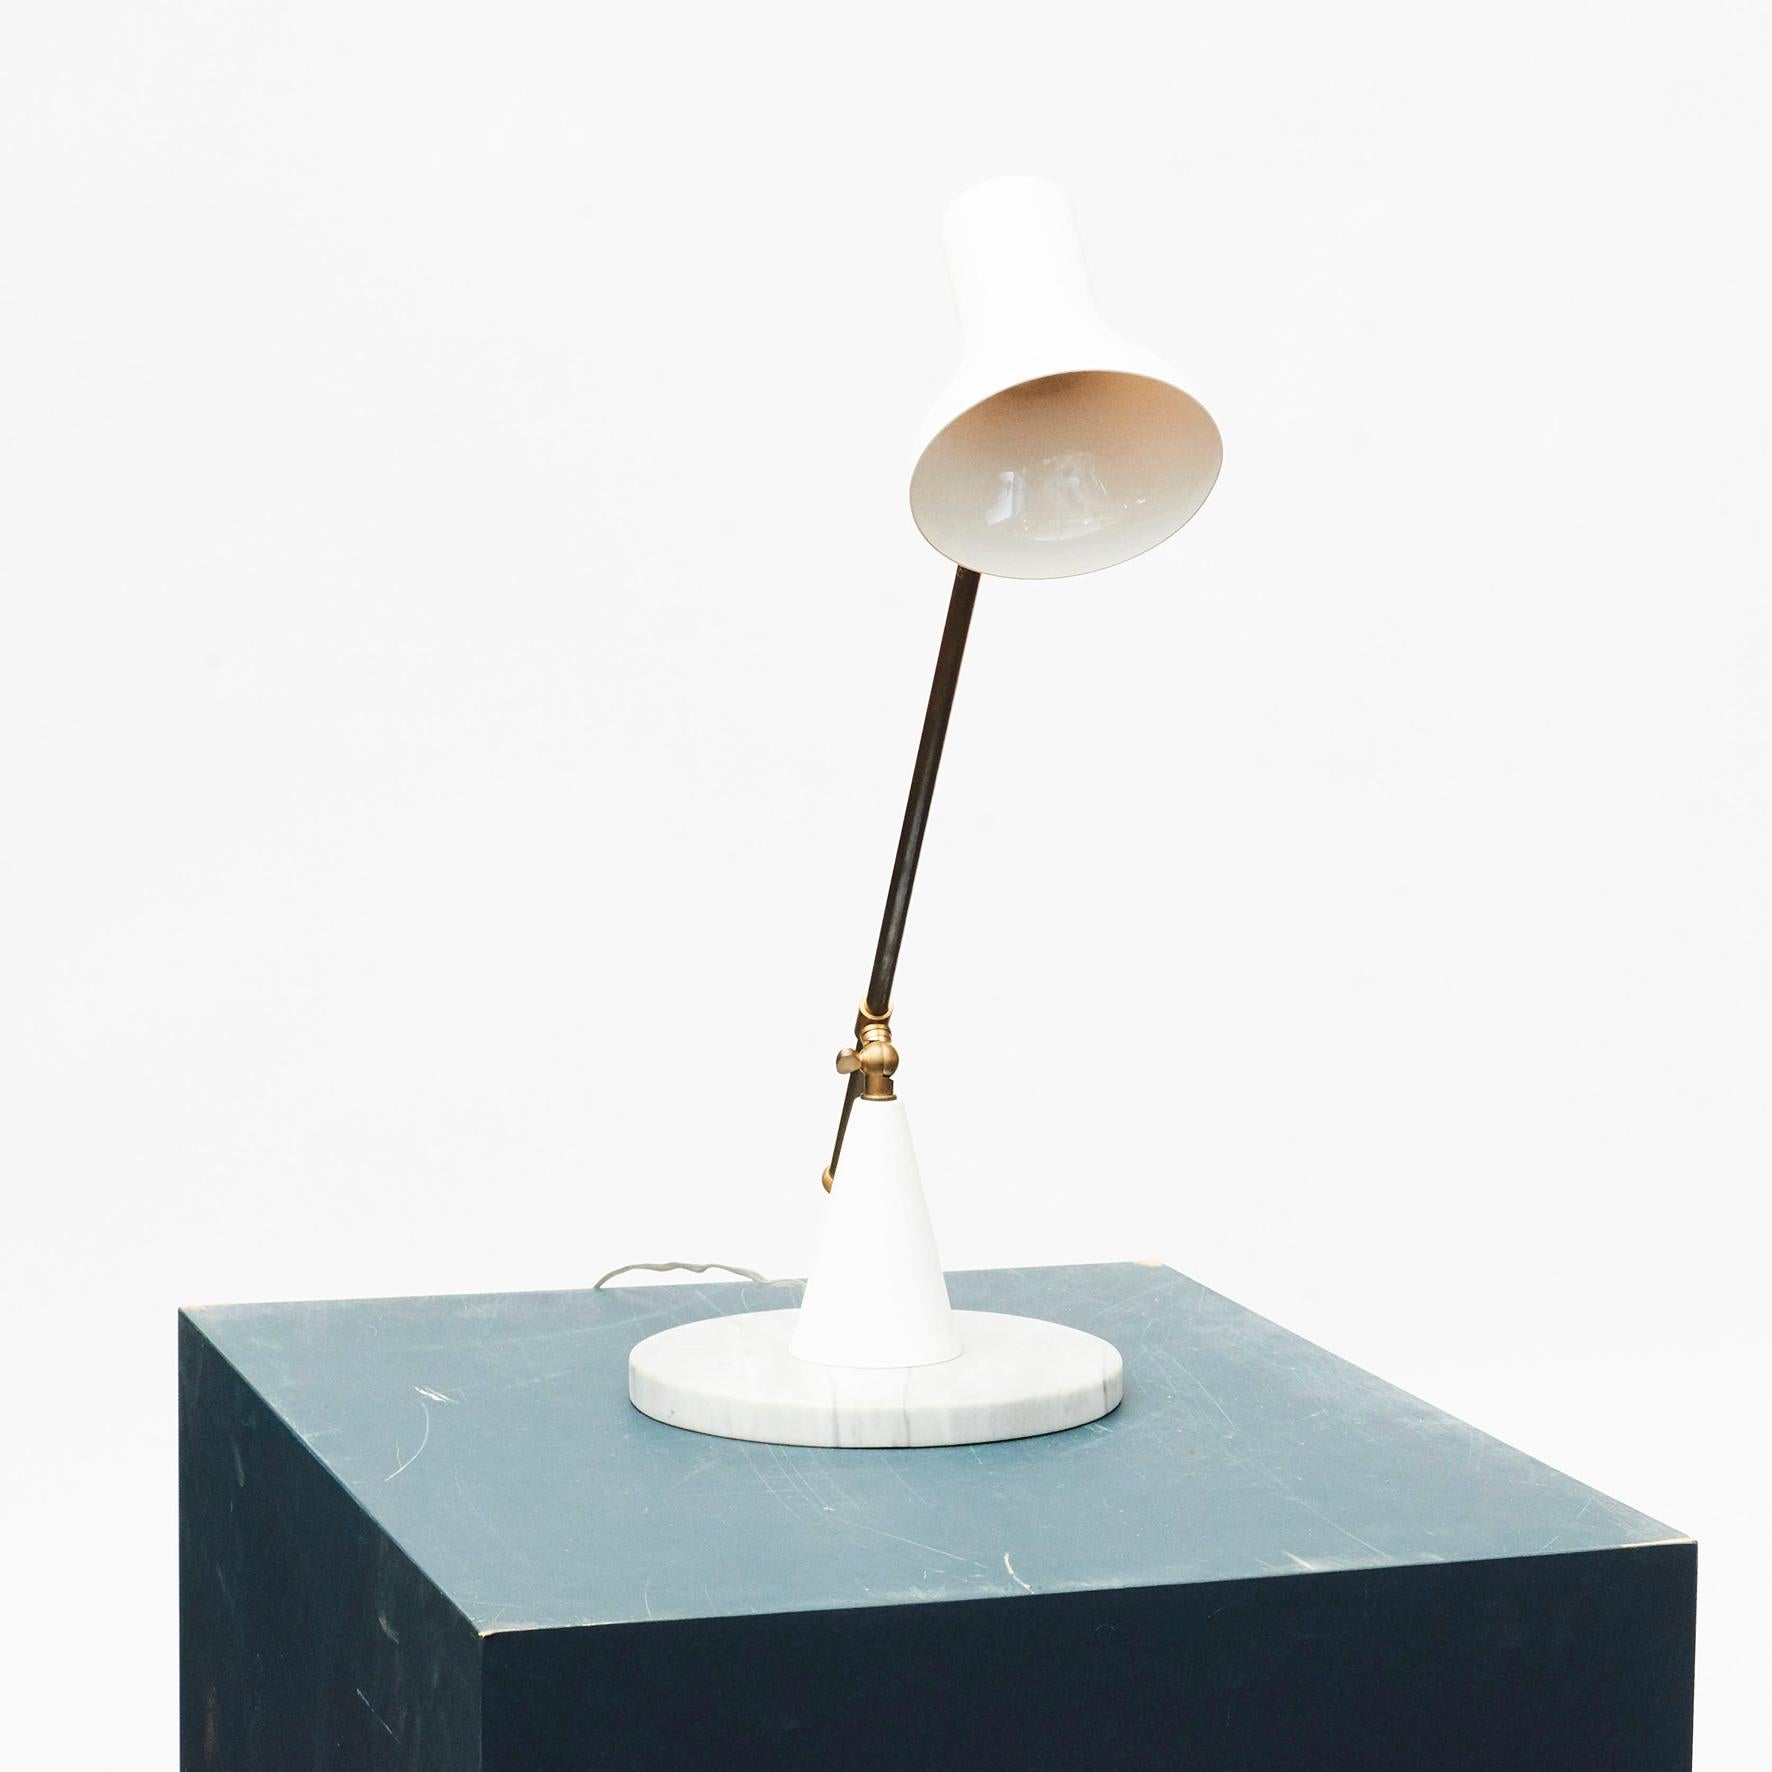 Gino Sarfatti, 1912-1985.
Brass and white lacquered metal table lamp on white marble base.
Vertical brass arm is adjustable in up-down position.
Design by Gino Sarfatti, Italy, circa 1955.
Original untouched condition (newer cord and socket).